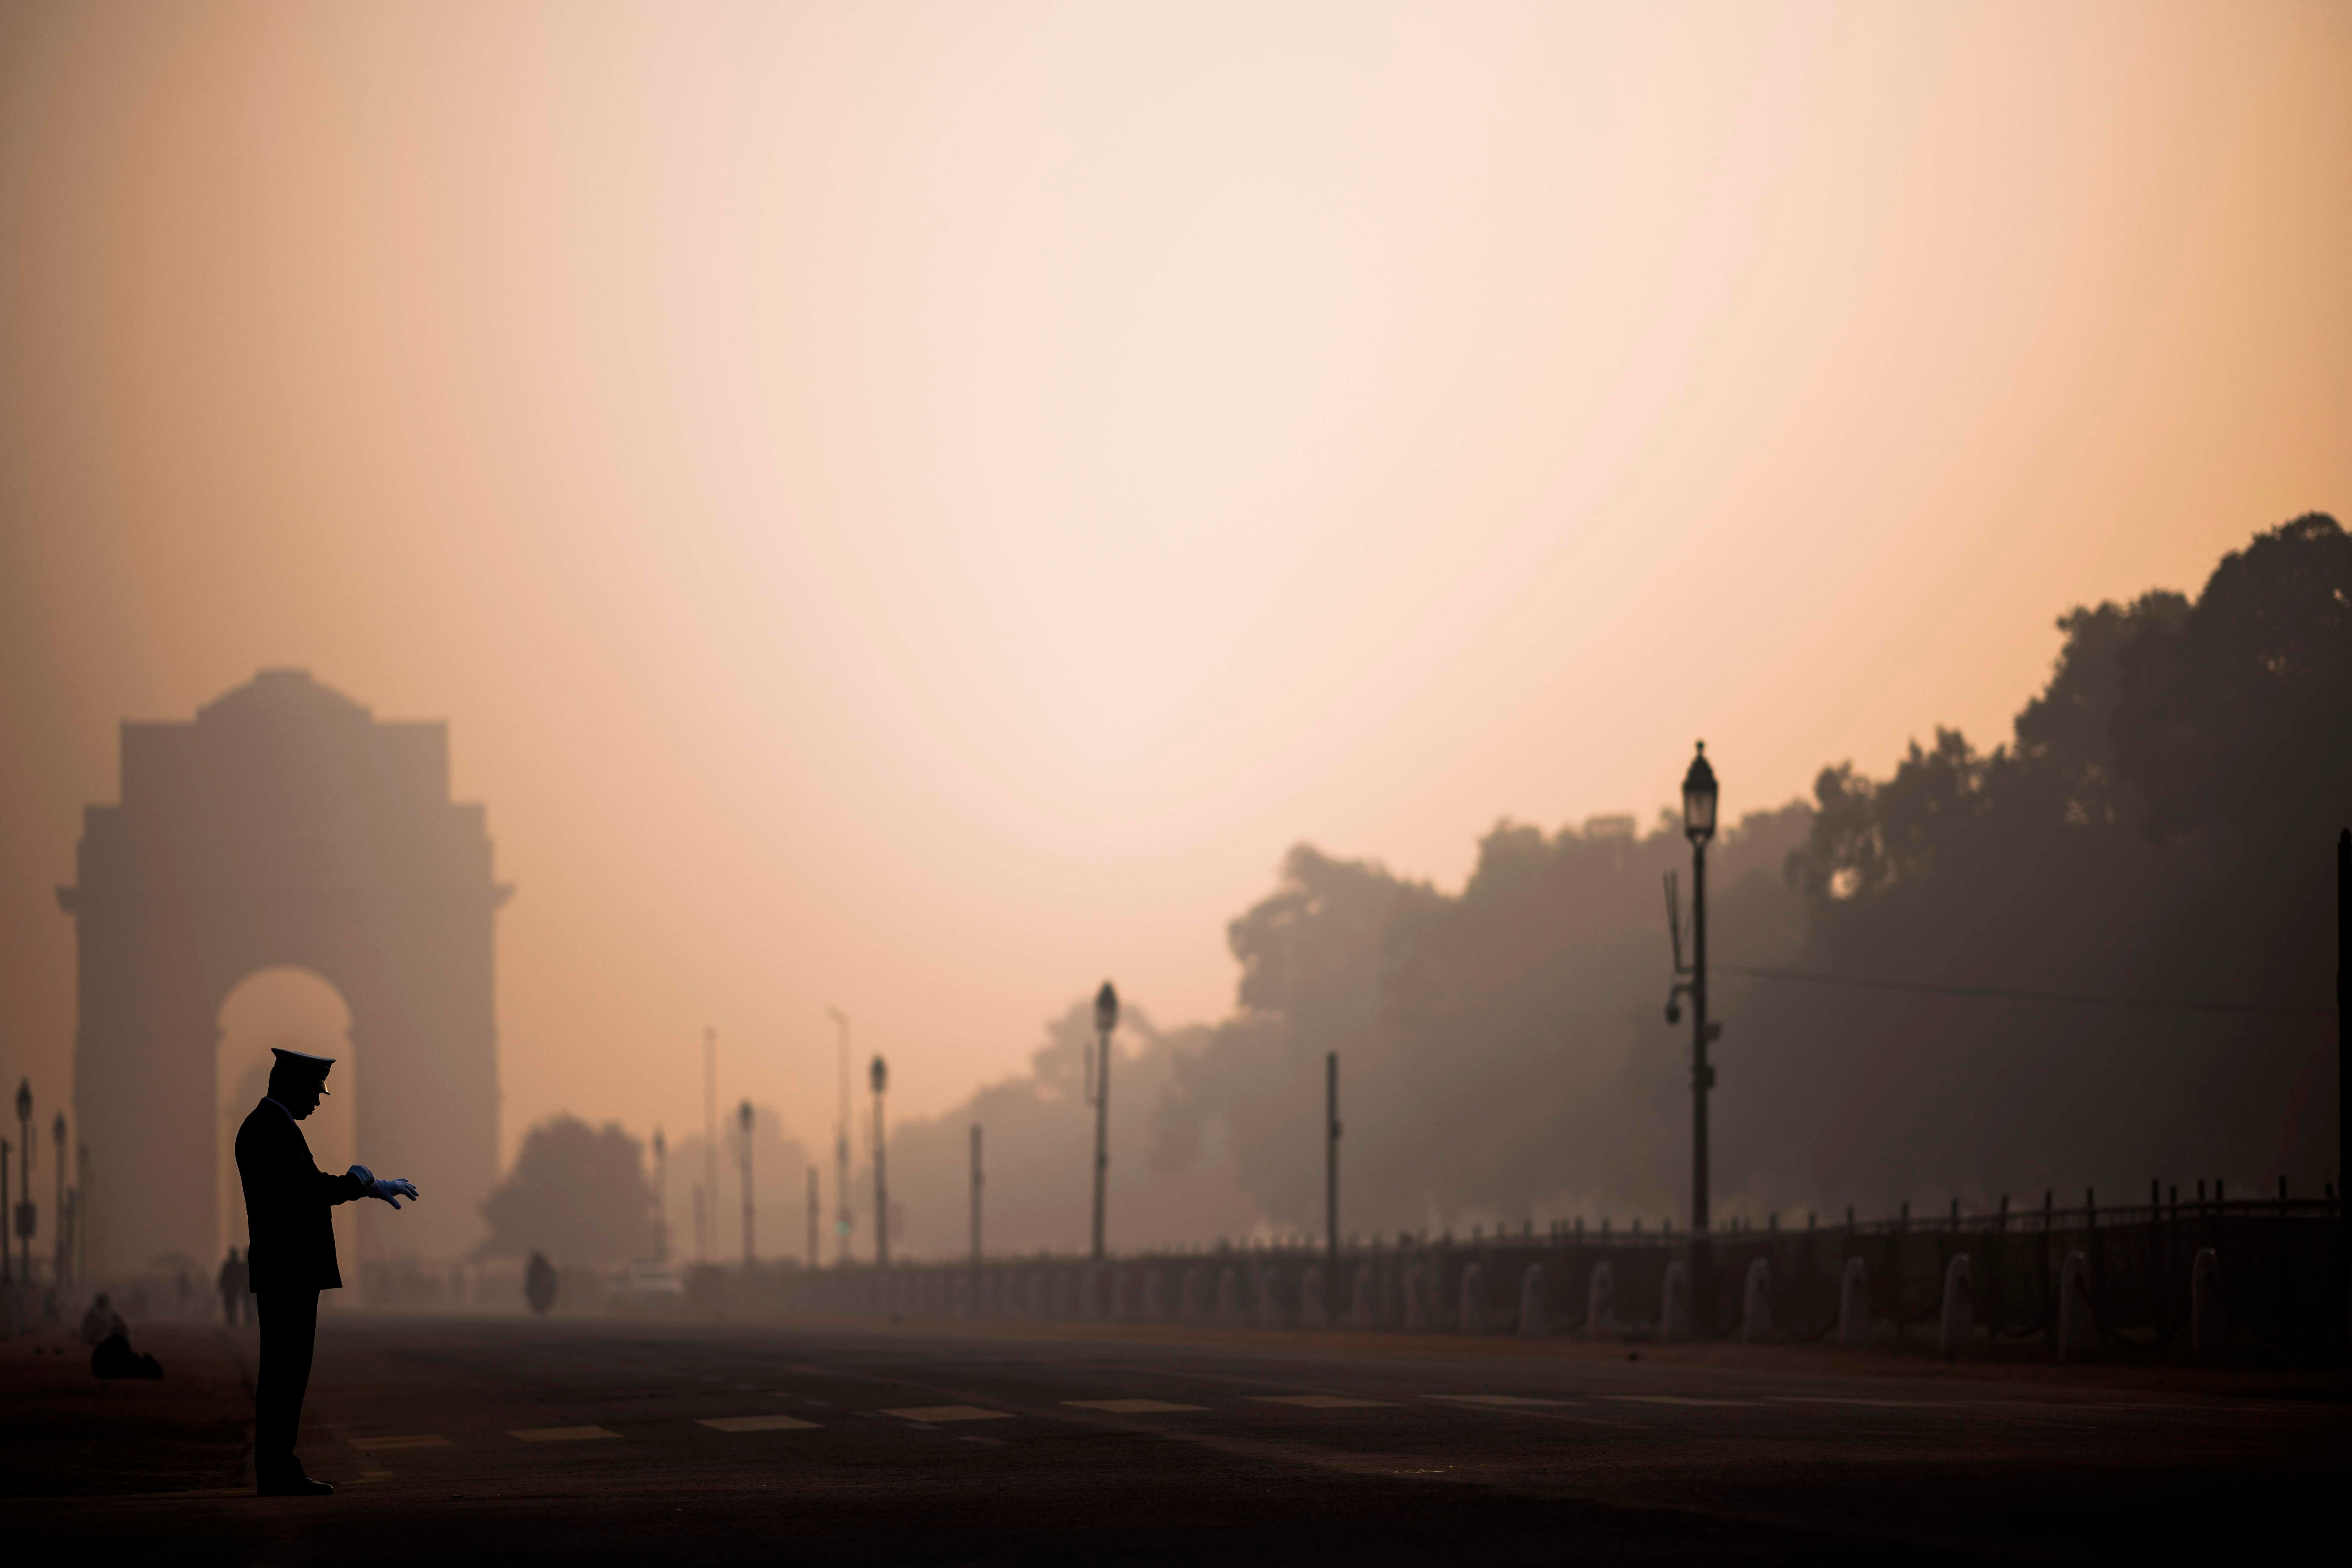 A soldier waits on a street near India Gate in heavy smoggy conditions in New Delhi. Credit: AFP